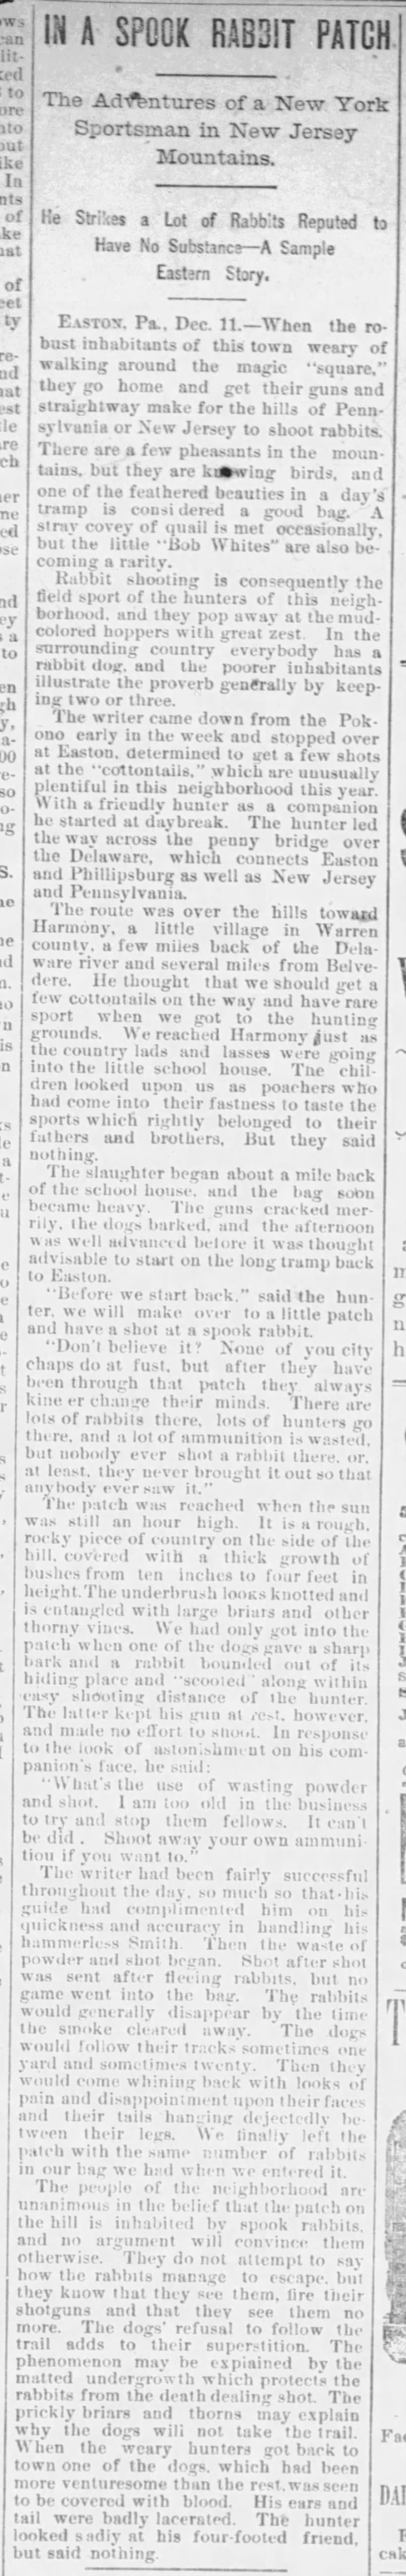 1891-01-02 In a Spook Rabbit patch

Morning World-Herald (Omaha, NB), p. 2